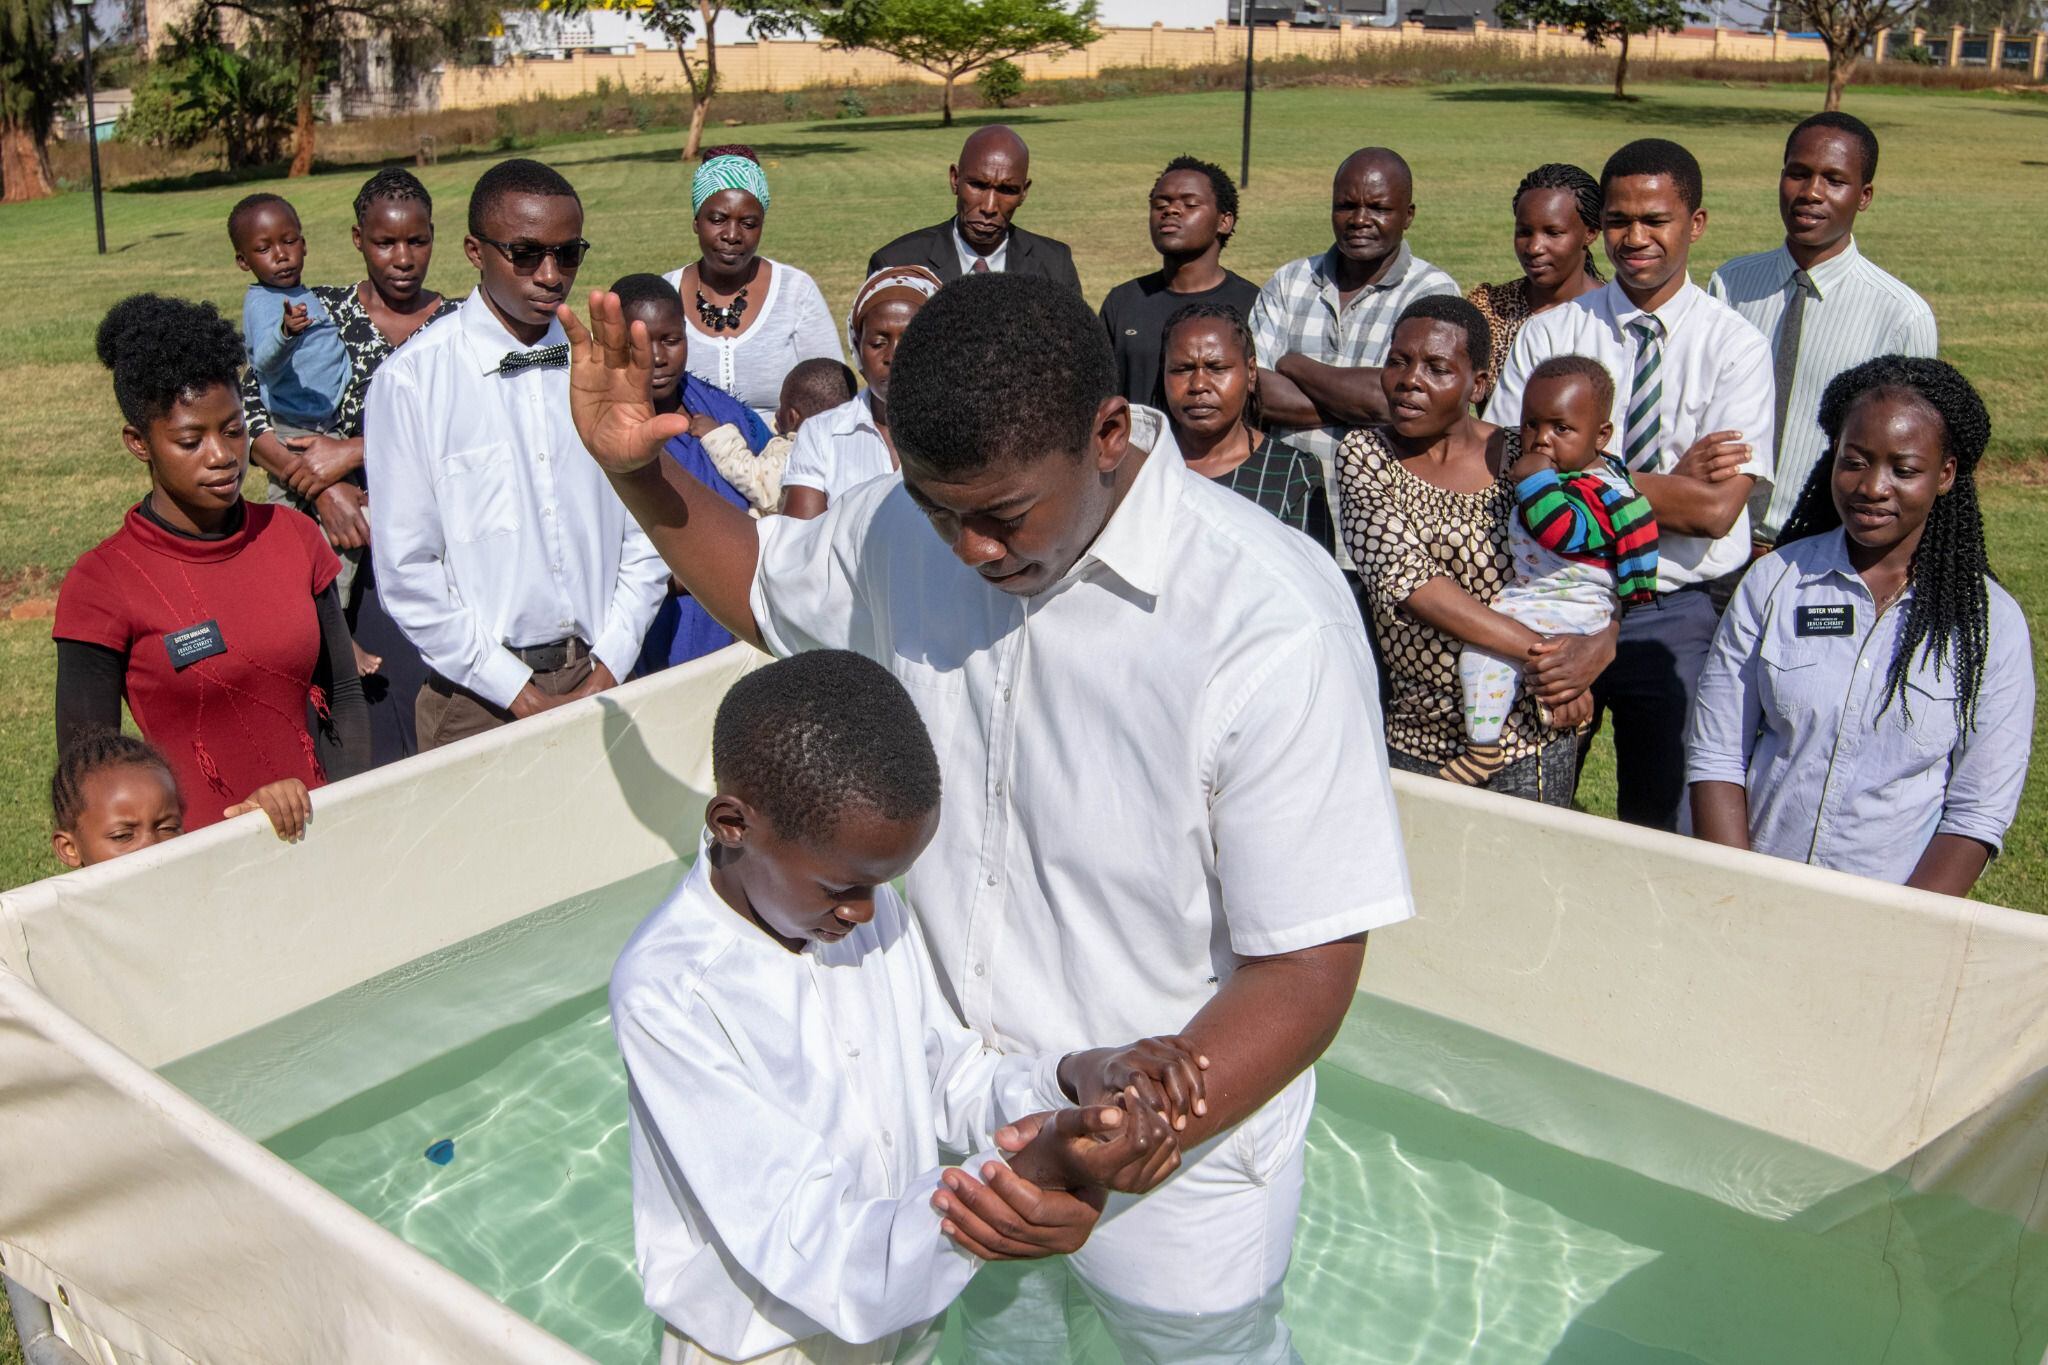 (Photo courtesy of The Church of Jesus Christ of Latter-day Saints)
A Latter-day Saint baptism in Africa.